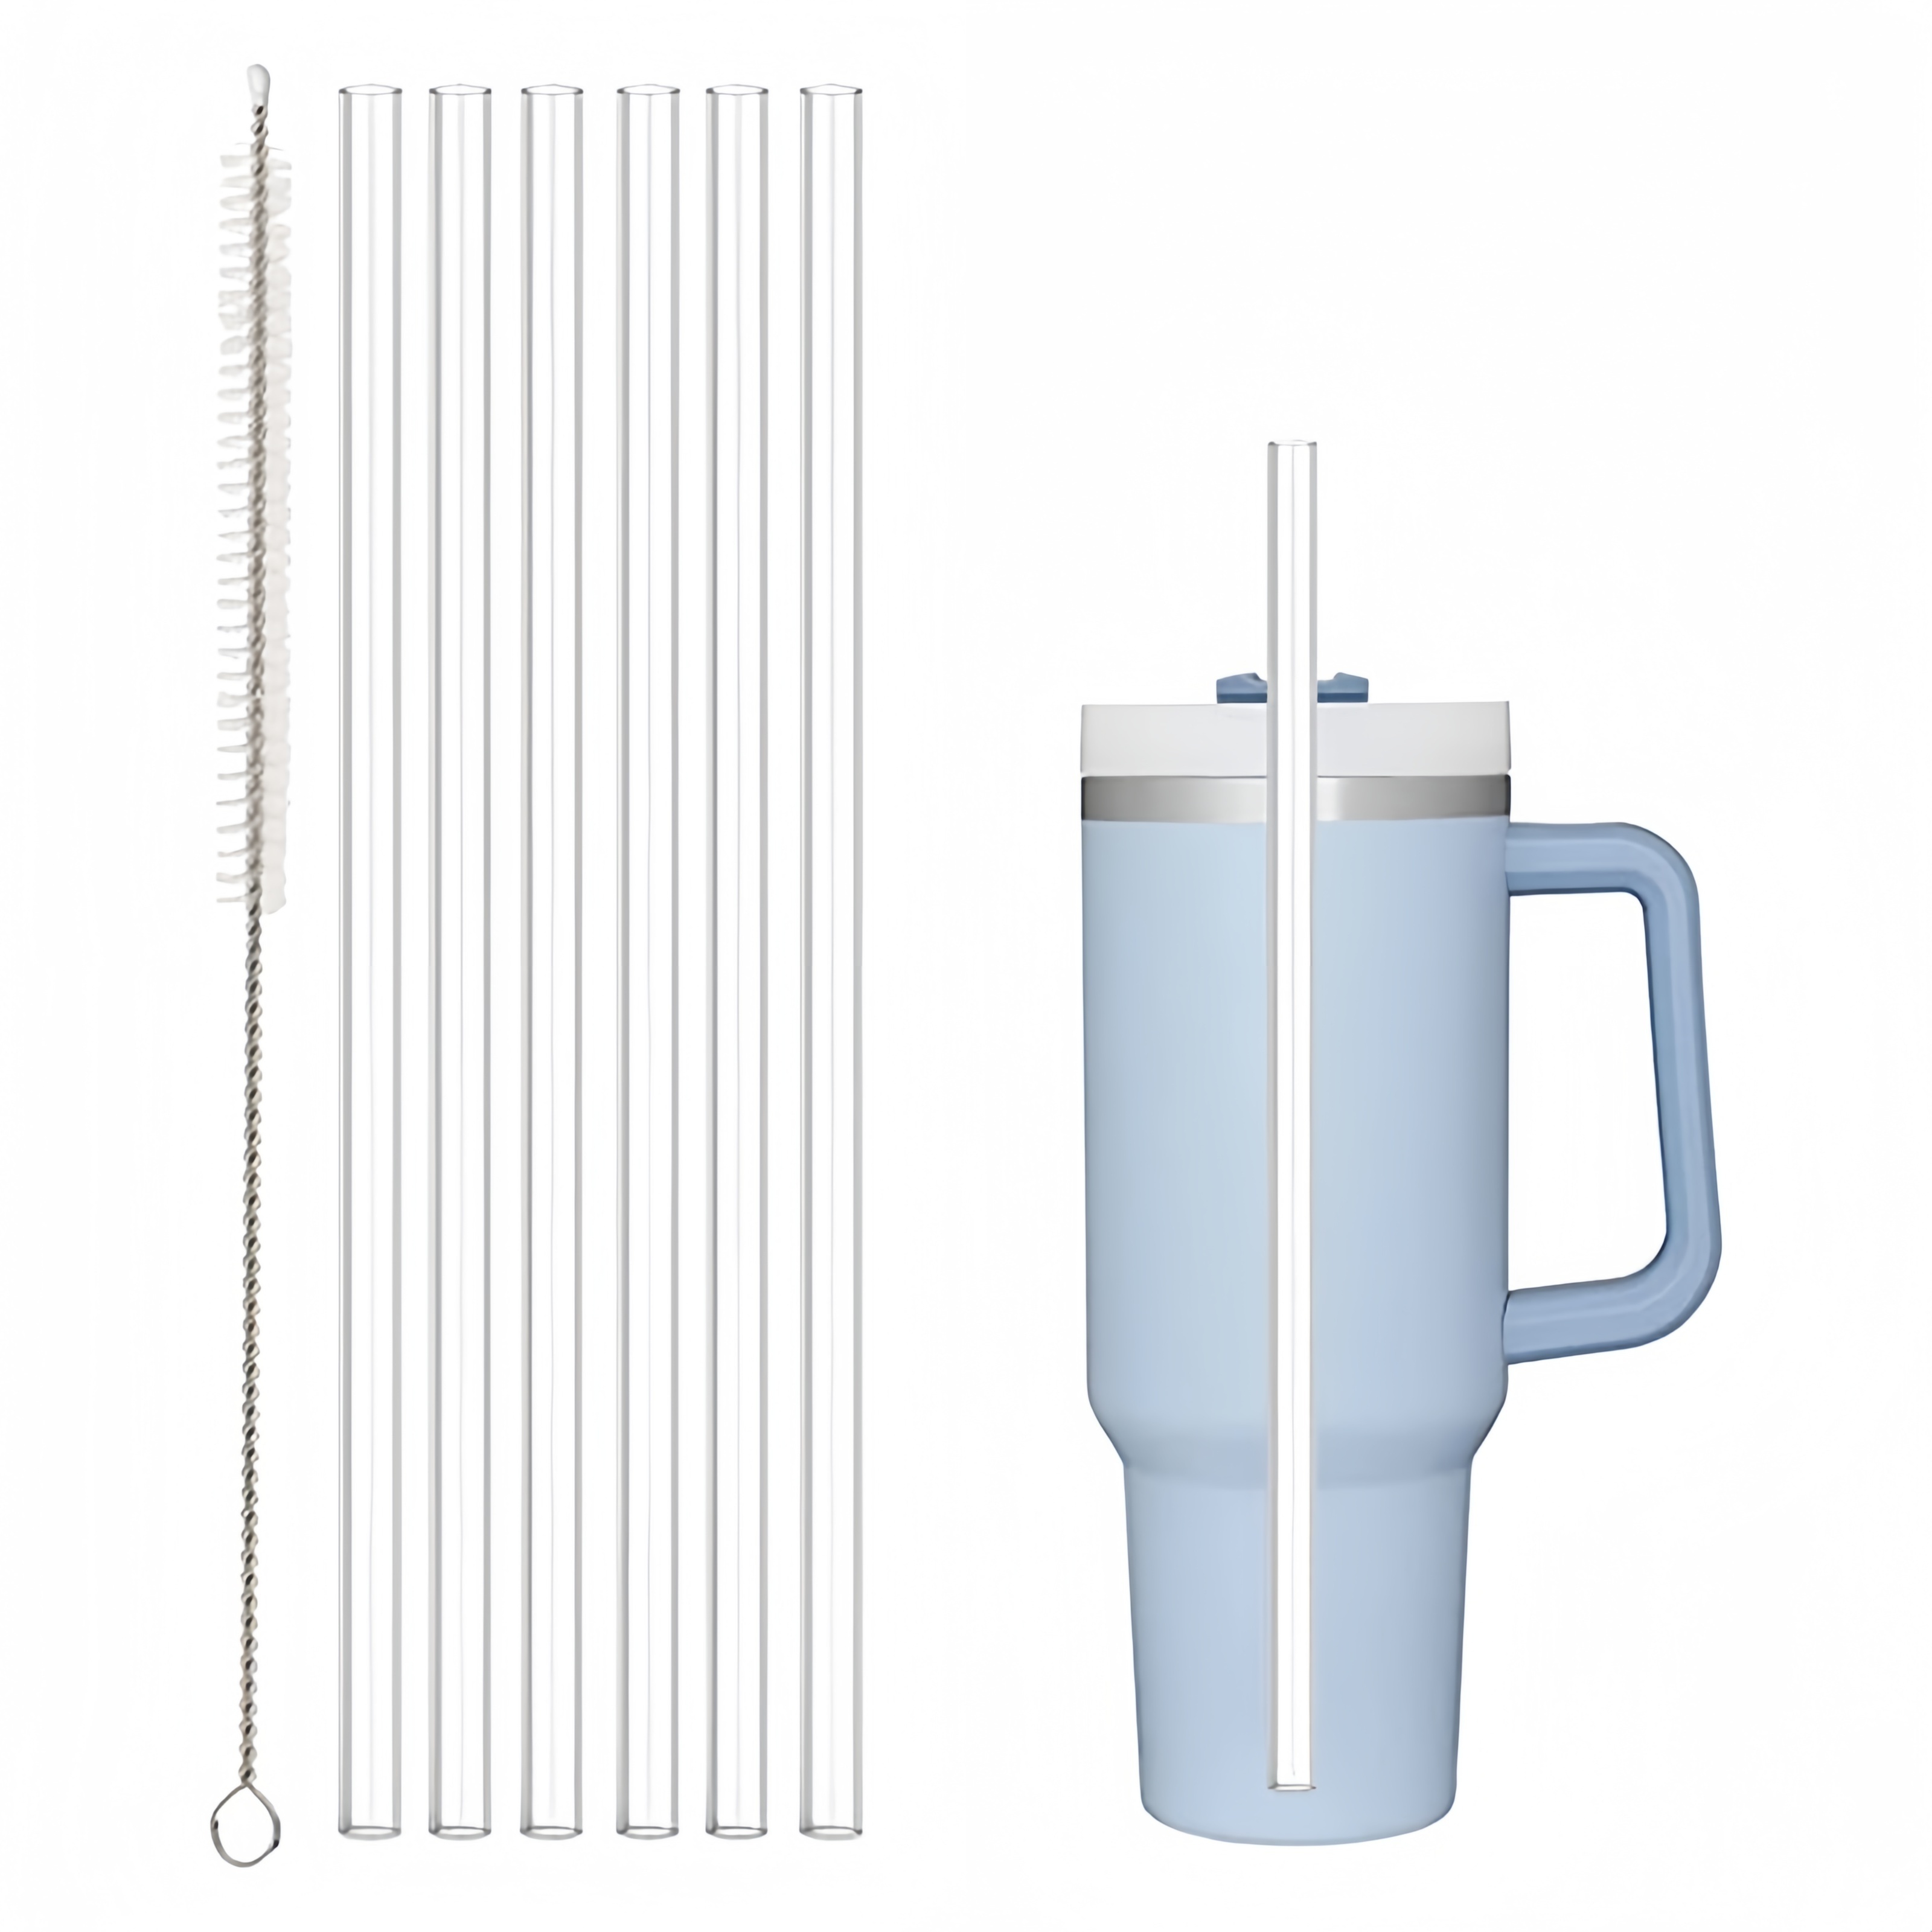 Stanley Cup Accessories: Straw Cover 5pcs, Metal Straws 2pcs and Straw Cleaner Brush 1pcs, Stylish Stanley Boot 1Pcs